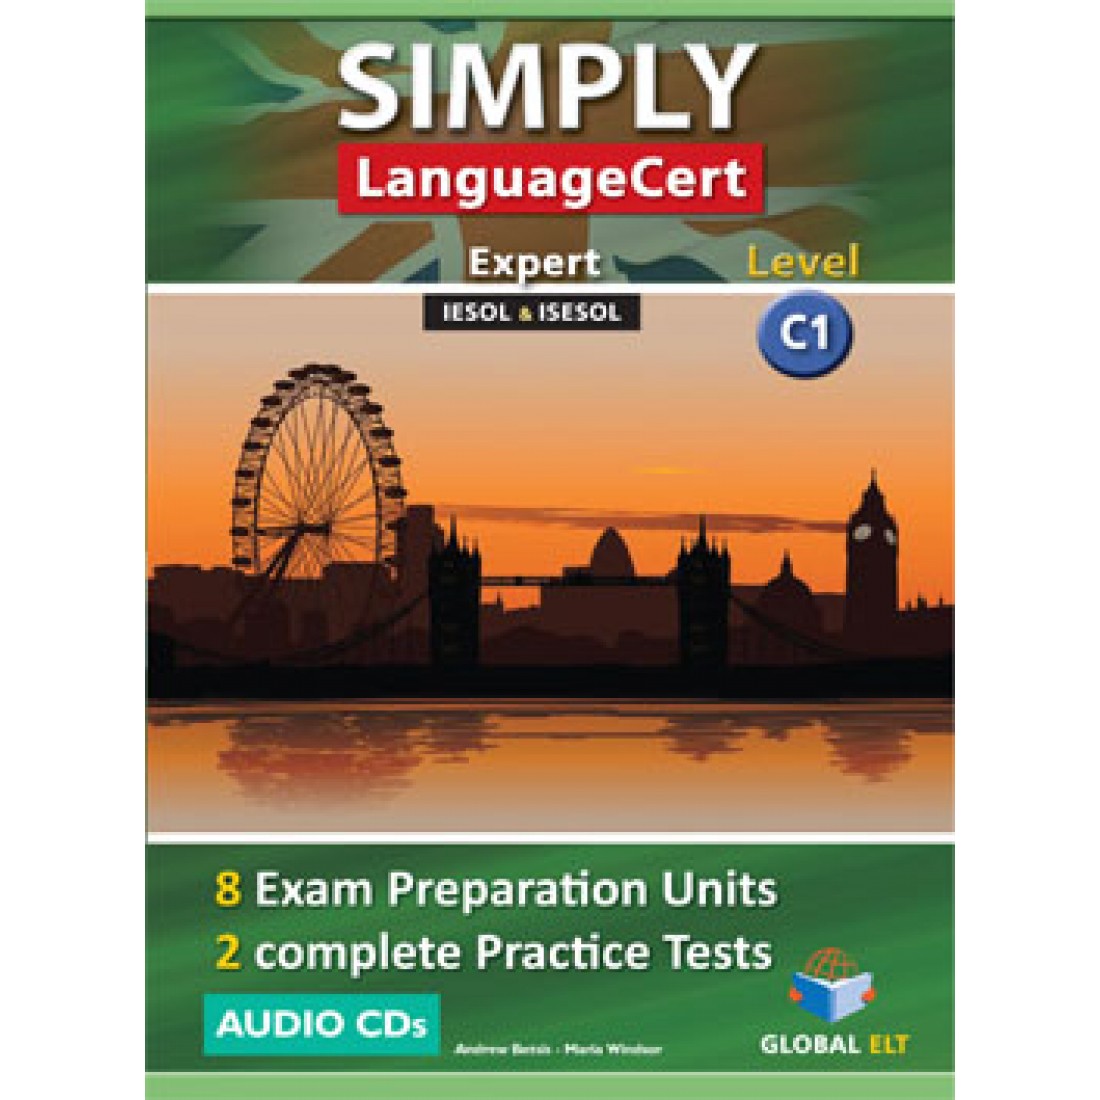 ELT book Test. English book Level b1. Global Tests Unit 2. English for Business communication student's book. English audio tests